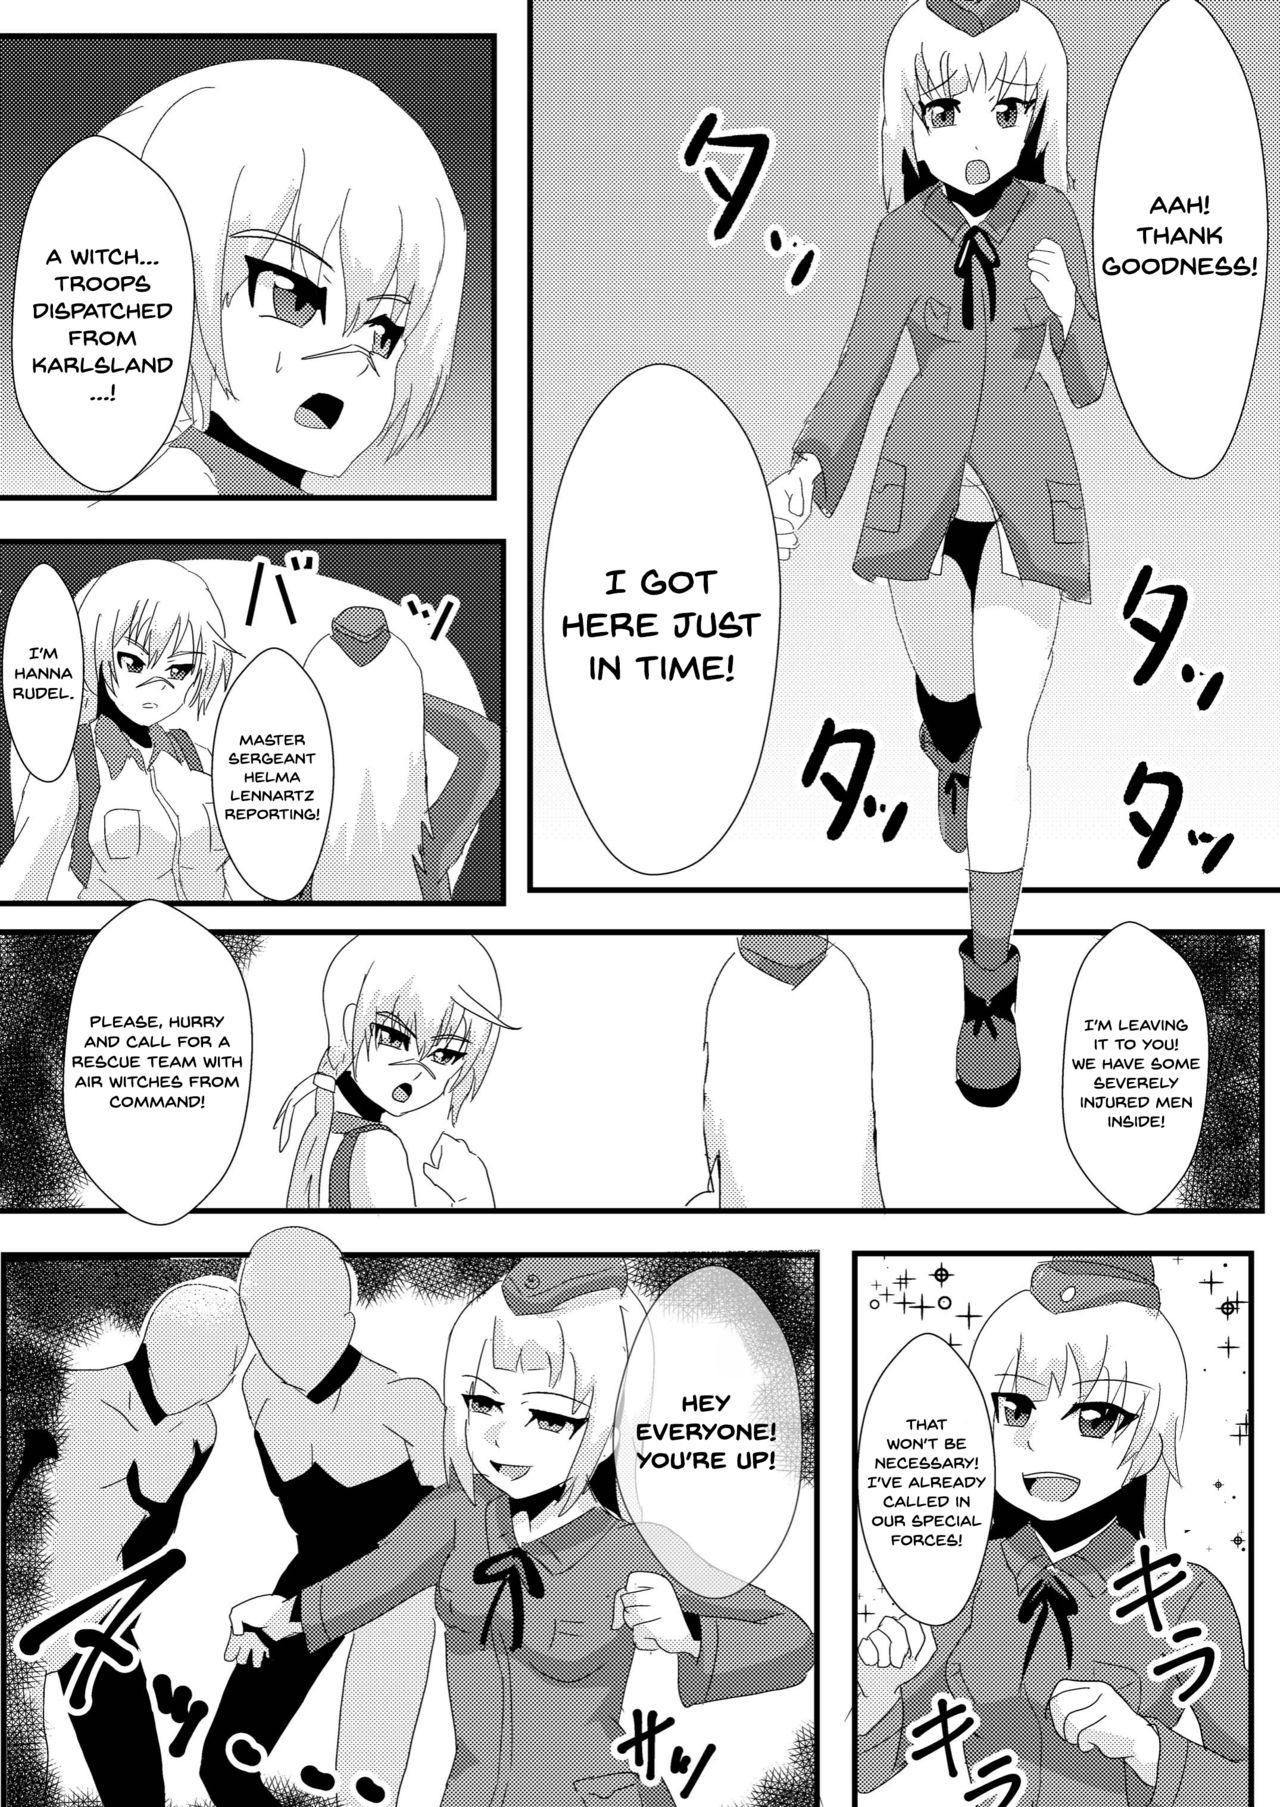 Atm Parasite Witches 2 - Strike witches Pattaya - Page 7